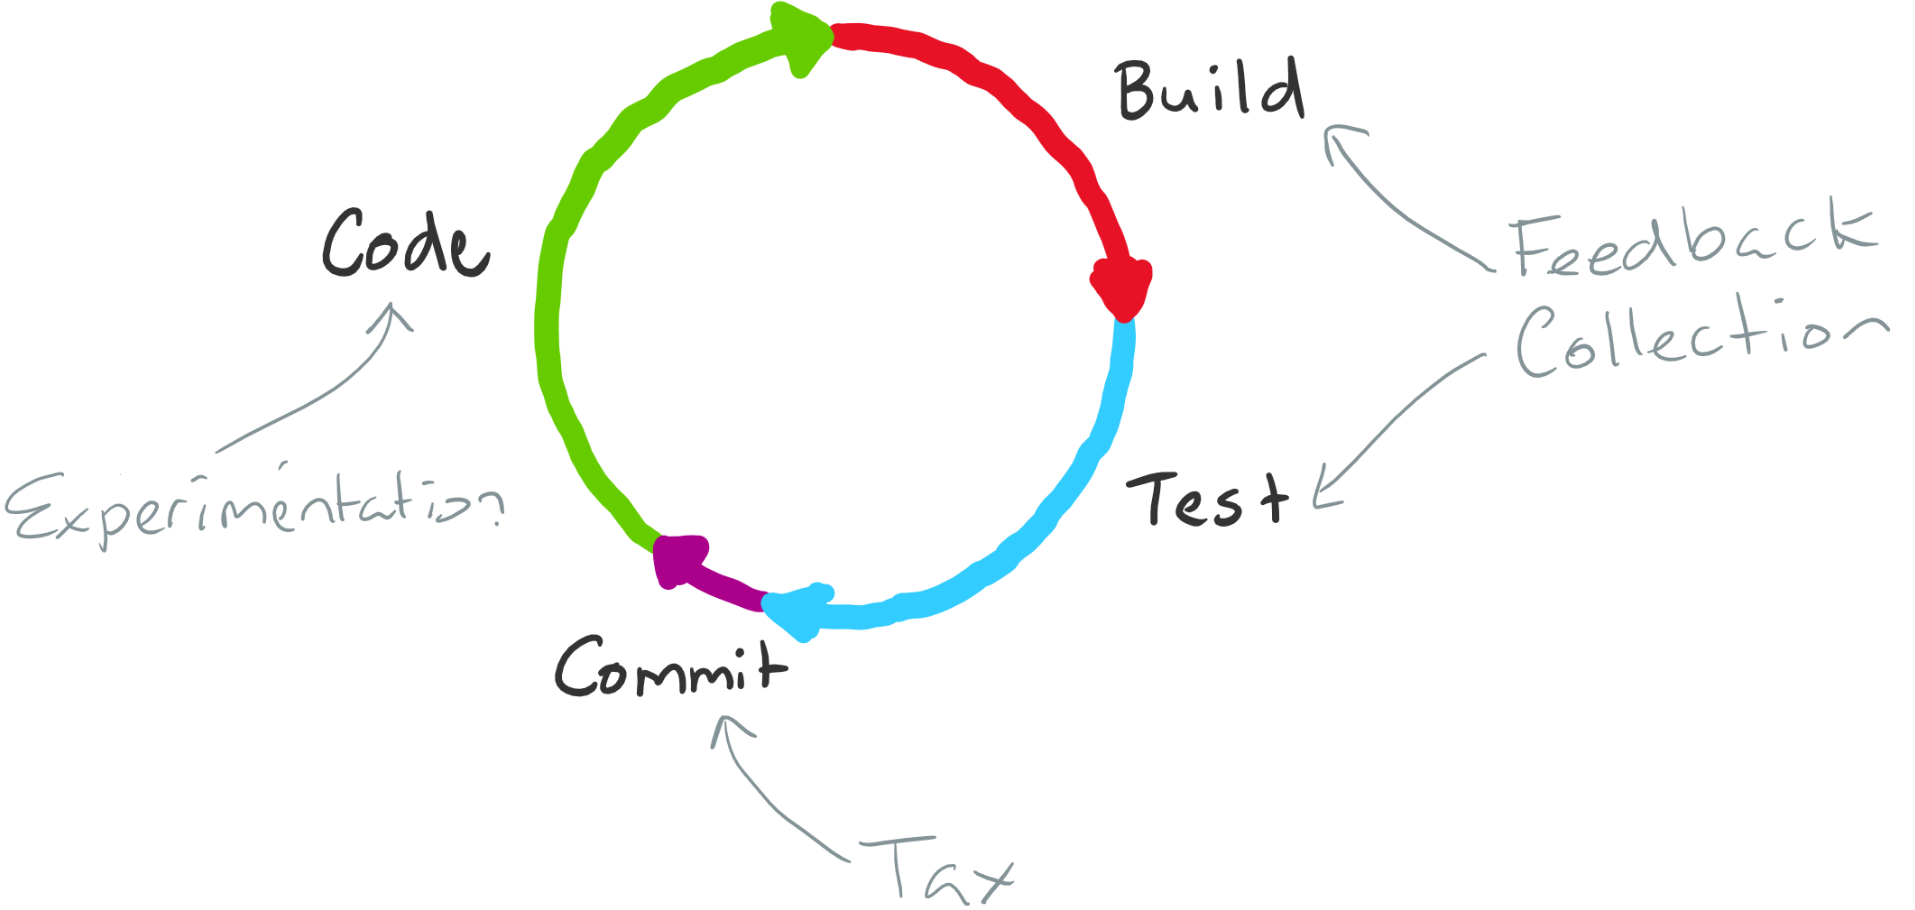 Diagram showing code, build, test and commit to helping to understand the Loop.